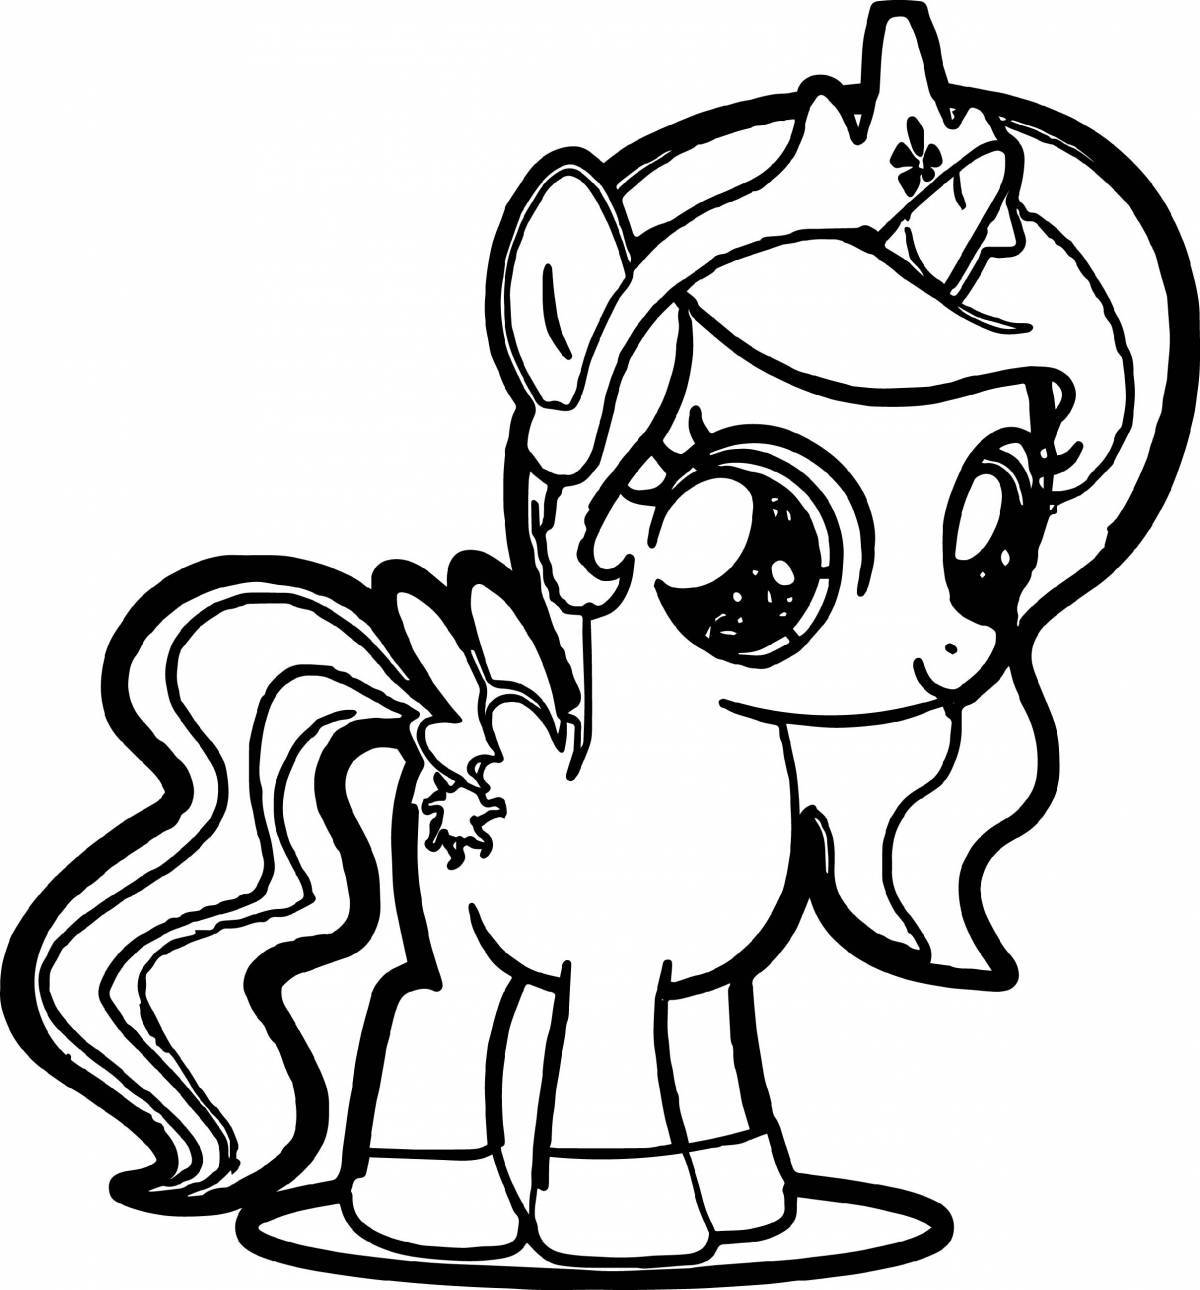 Charming pony coloring book